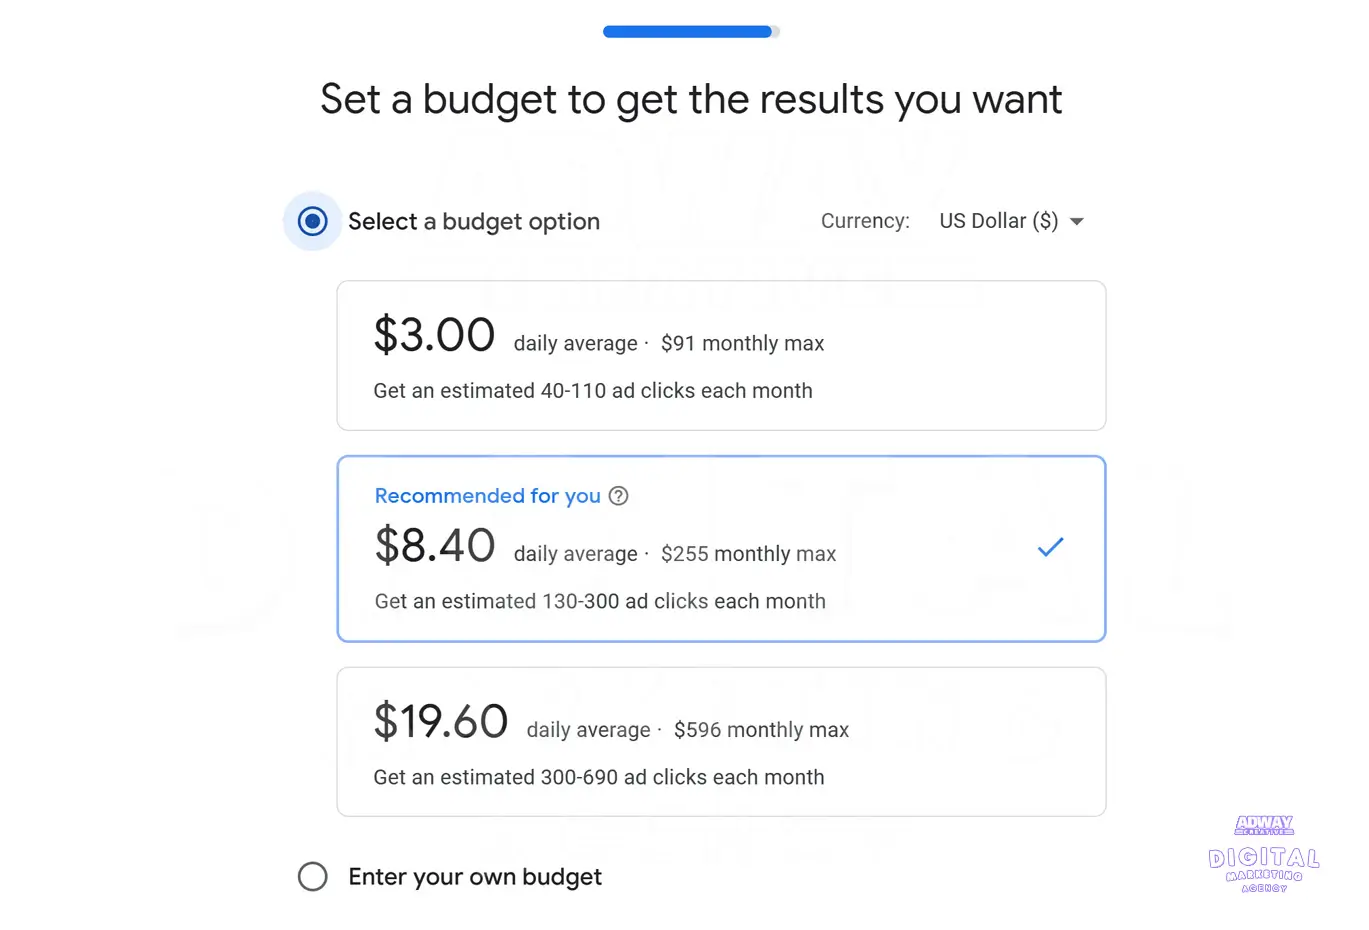 Set your ad budget based on Google's recommendations or enter your own preference.